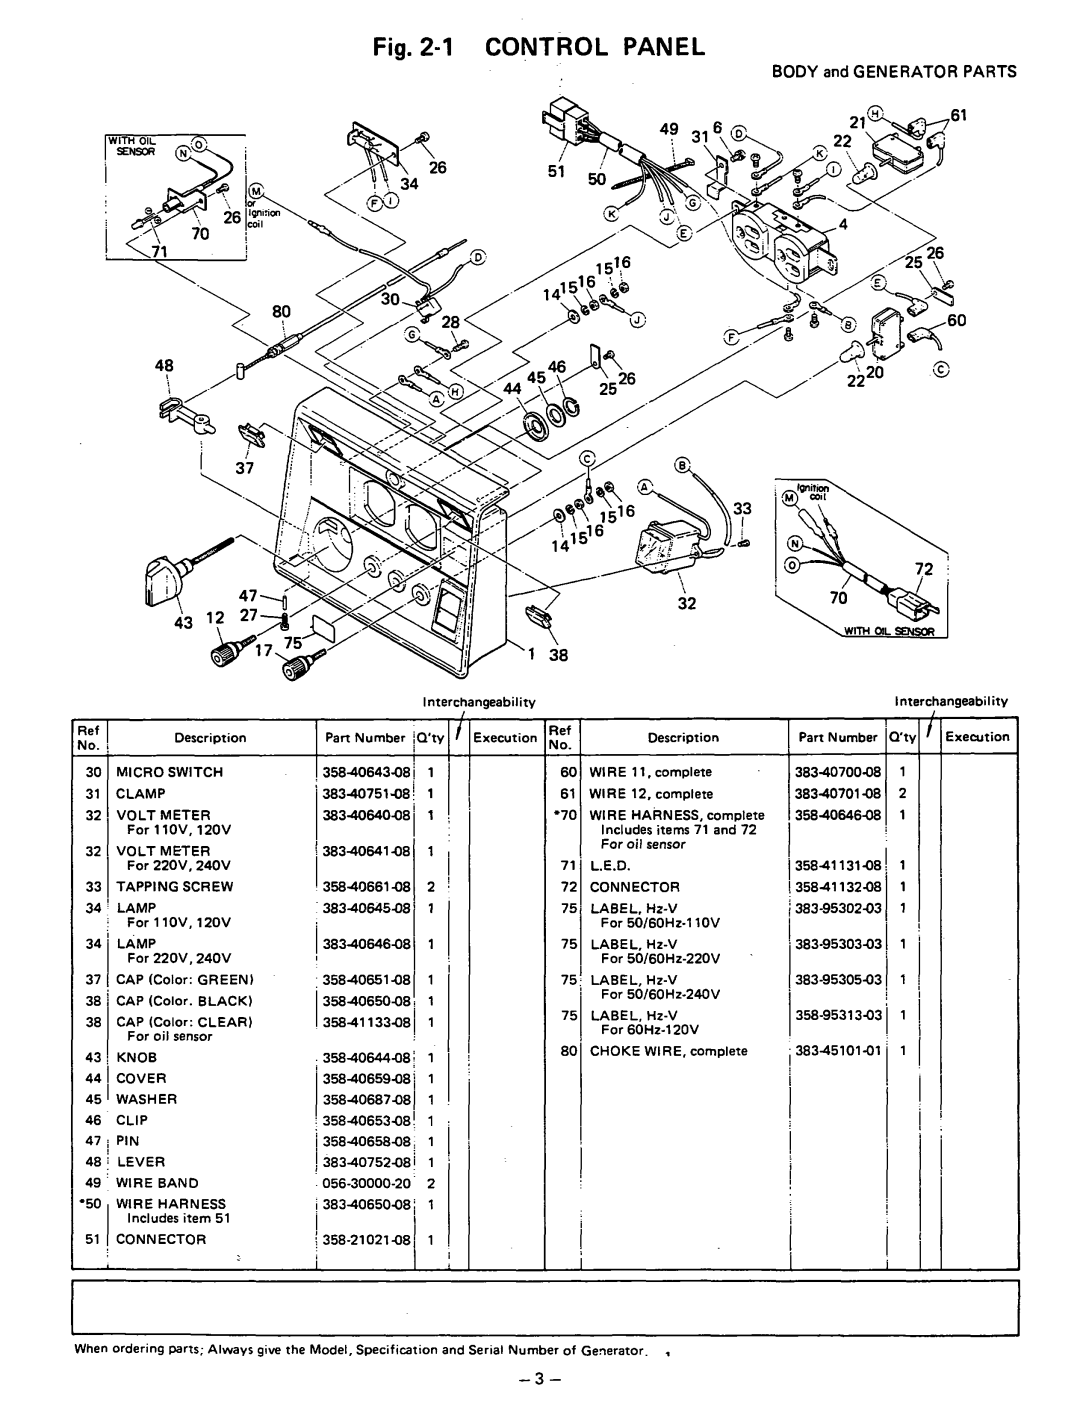 Subaru Robin Power Products R650 manual 1CONTROL PANEL, BODY and GENERATOR PARTS, I 75 LABEL,HZ-V 